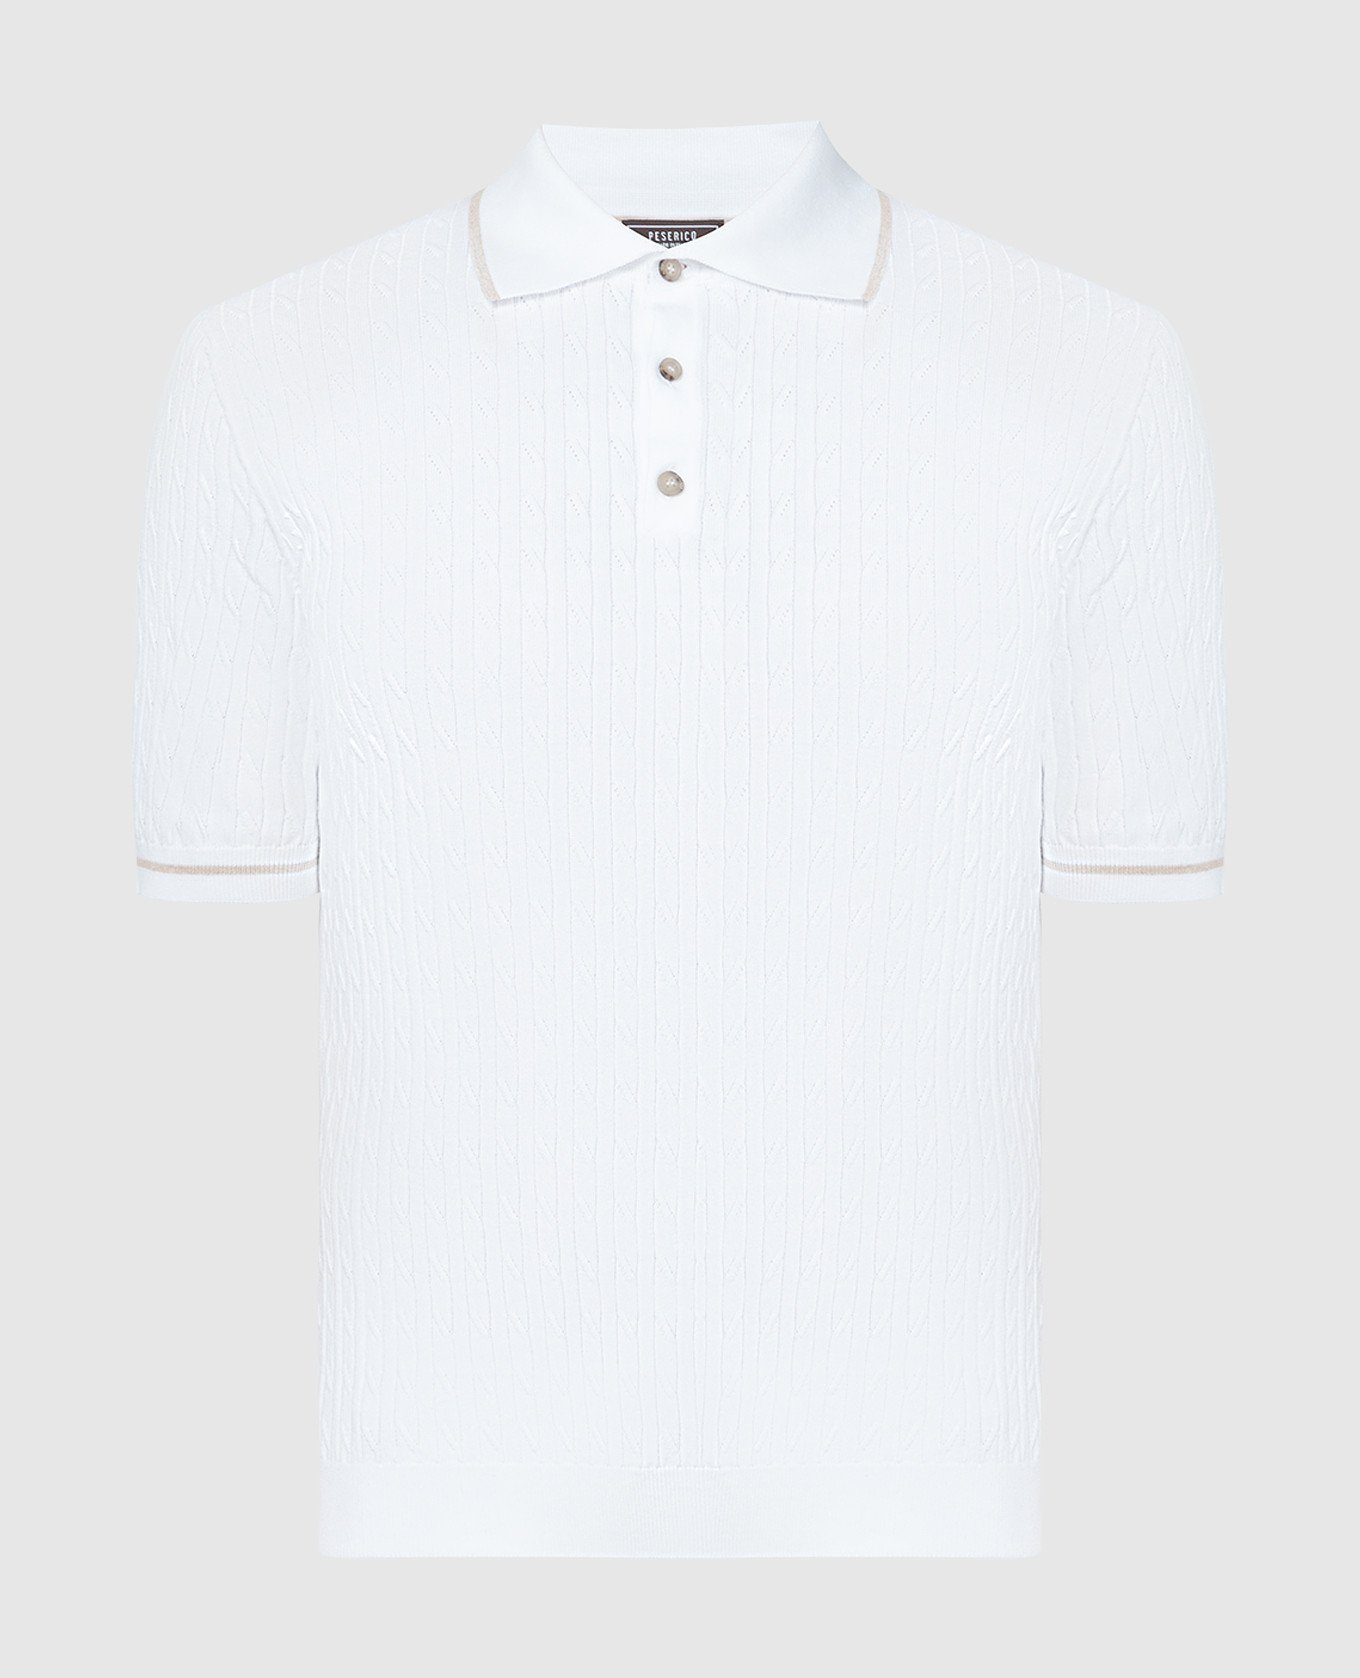 White polo with a textured pattern